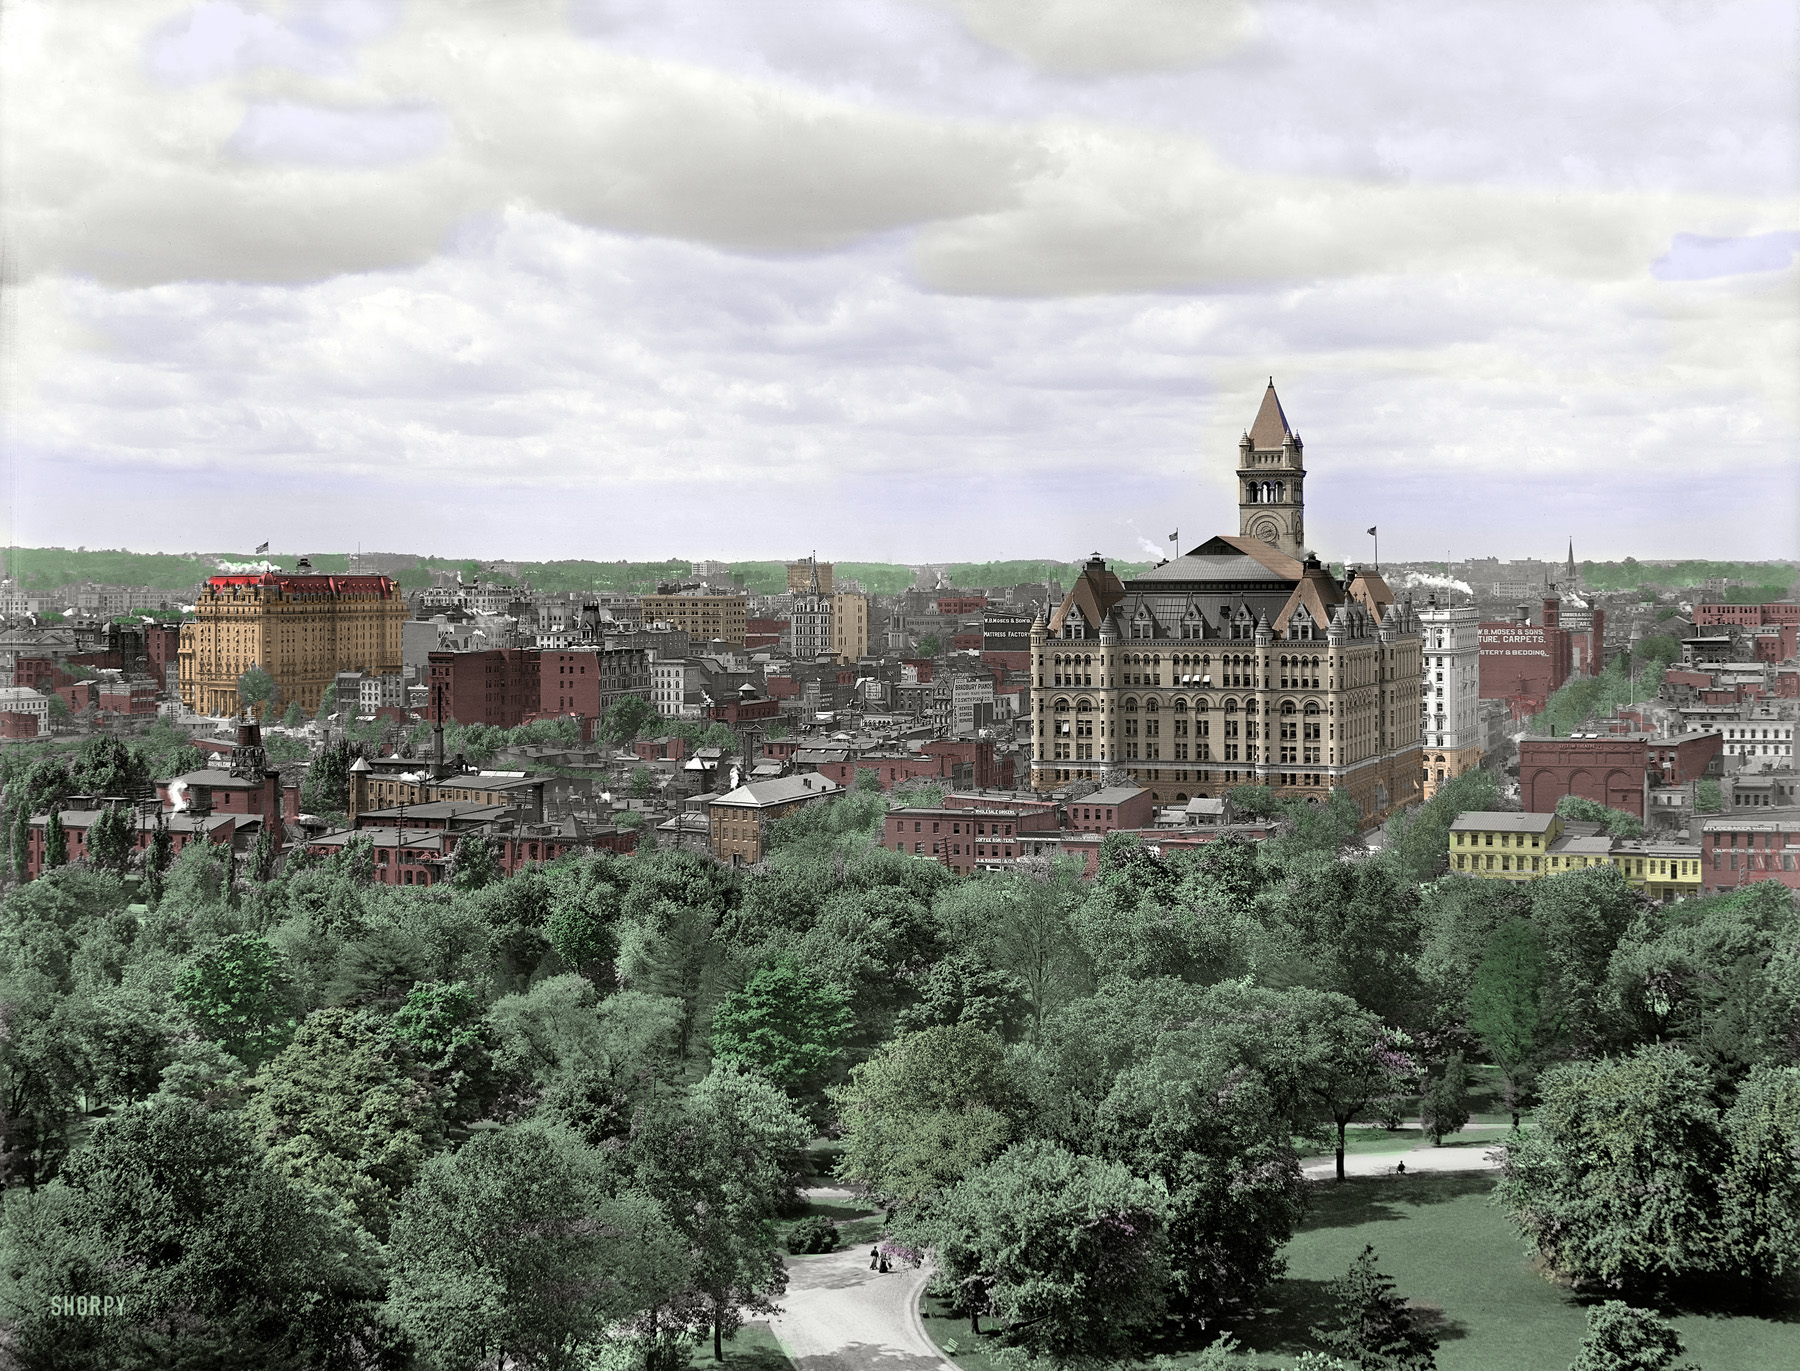 From a Shorpy original. Very nice picture, was fun colorizing it. View full size.